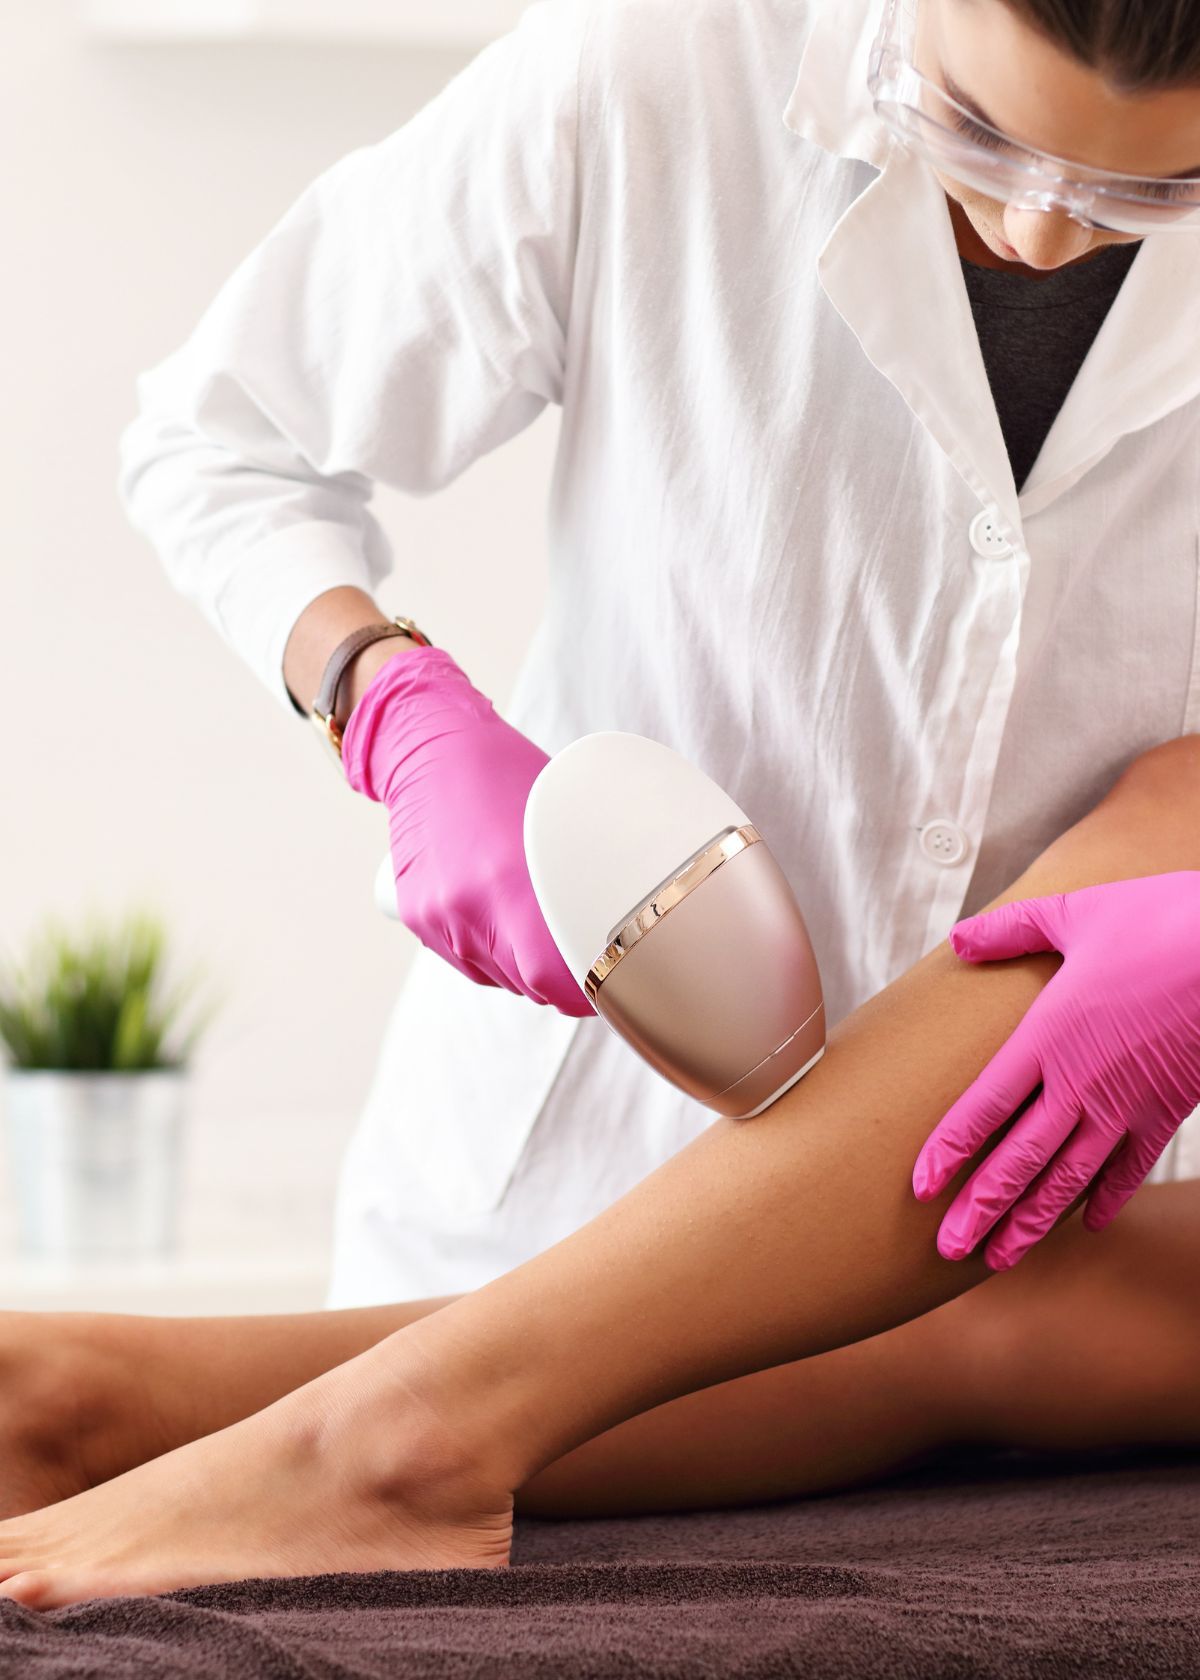 Say Goodbye To The Pain With Best Numbing Cream For Laser Hair Removal